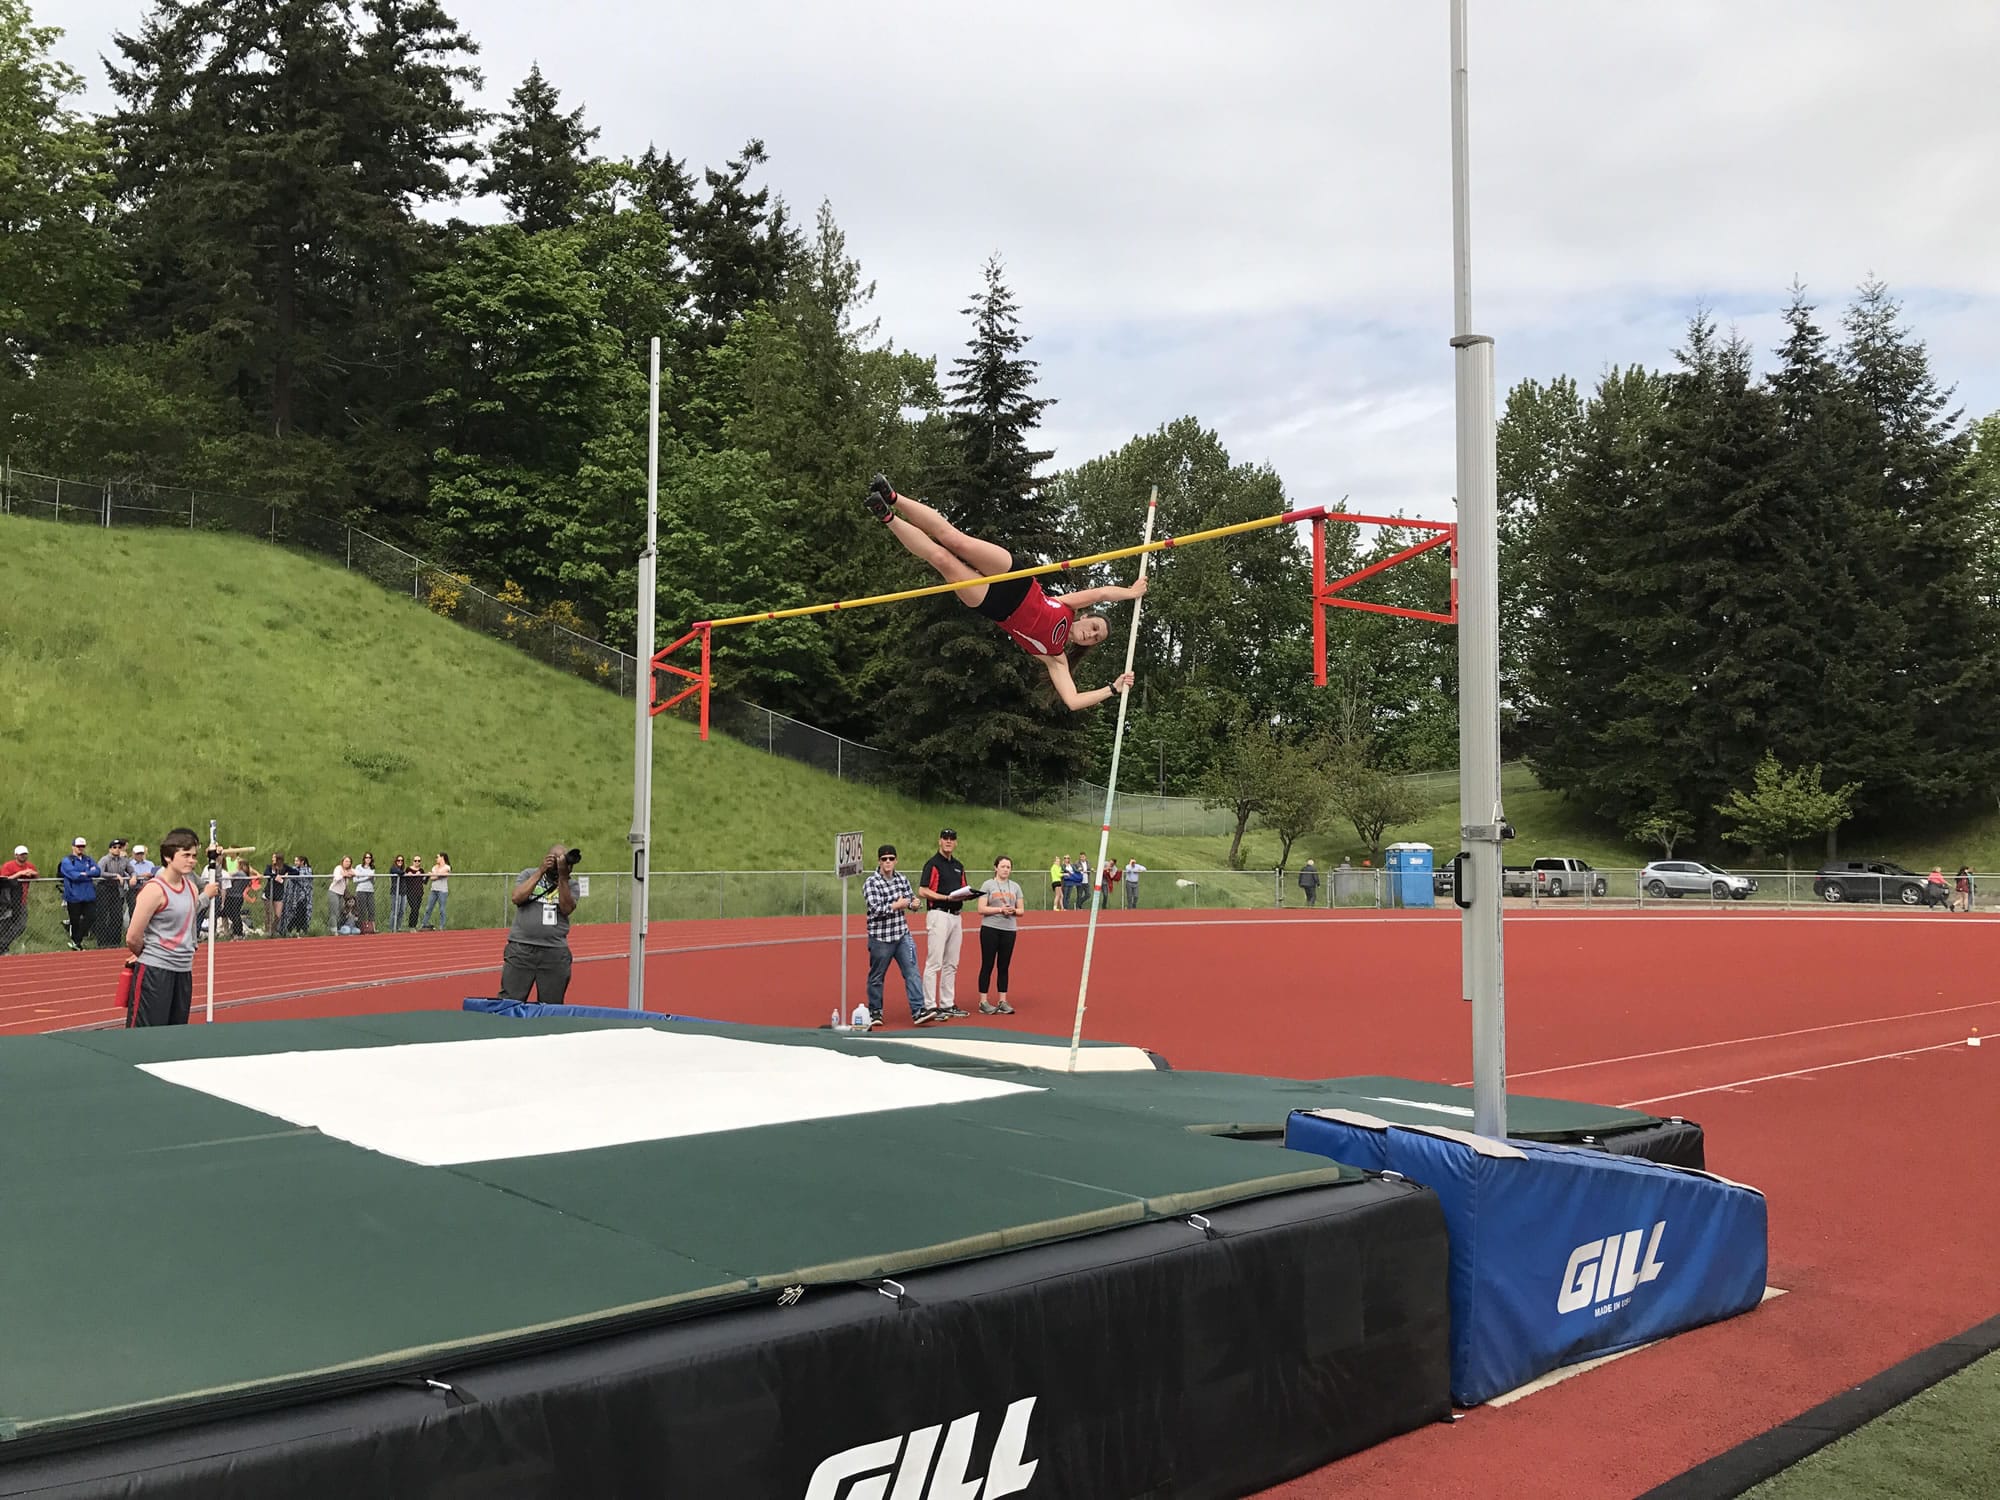 Riley Truitt of Camas clears the bar on her way to qualifying for state in the pole vault at the 4A bi-district meet in Kent (Meg Wochnick/The Columbian)